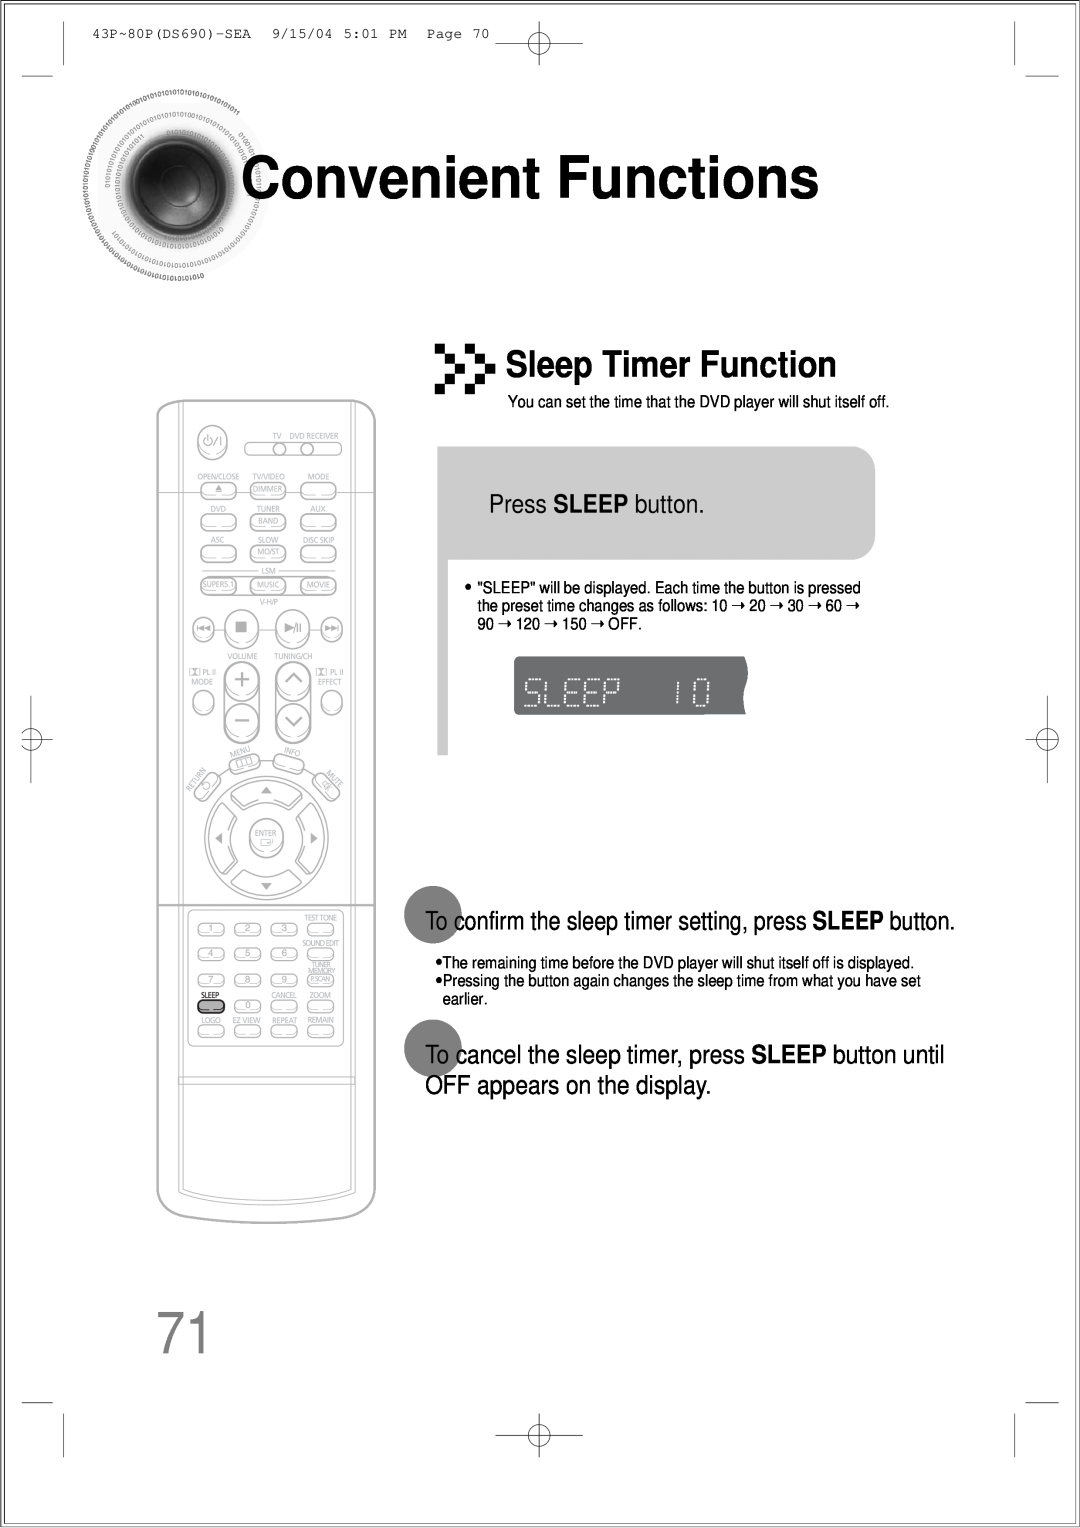 Samsung HT-DS690 ConvenientFunctions, Sleep Timer Function, Press SLEEP button, OFF appears on the display 